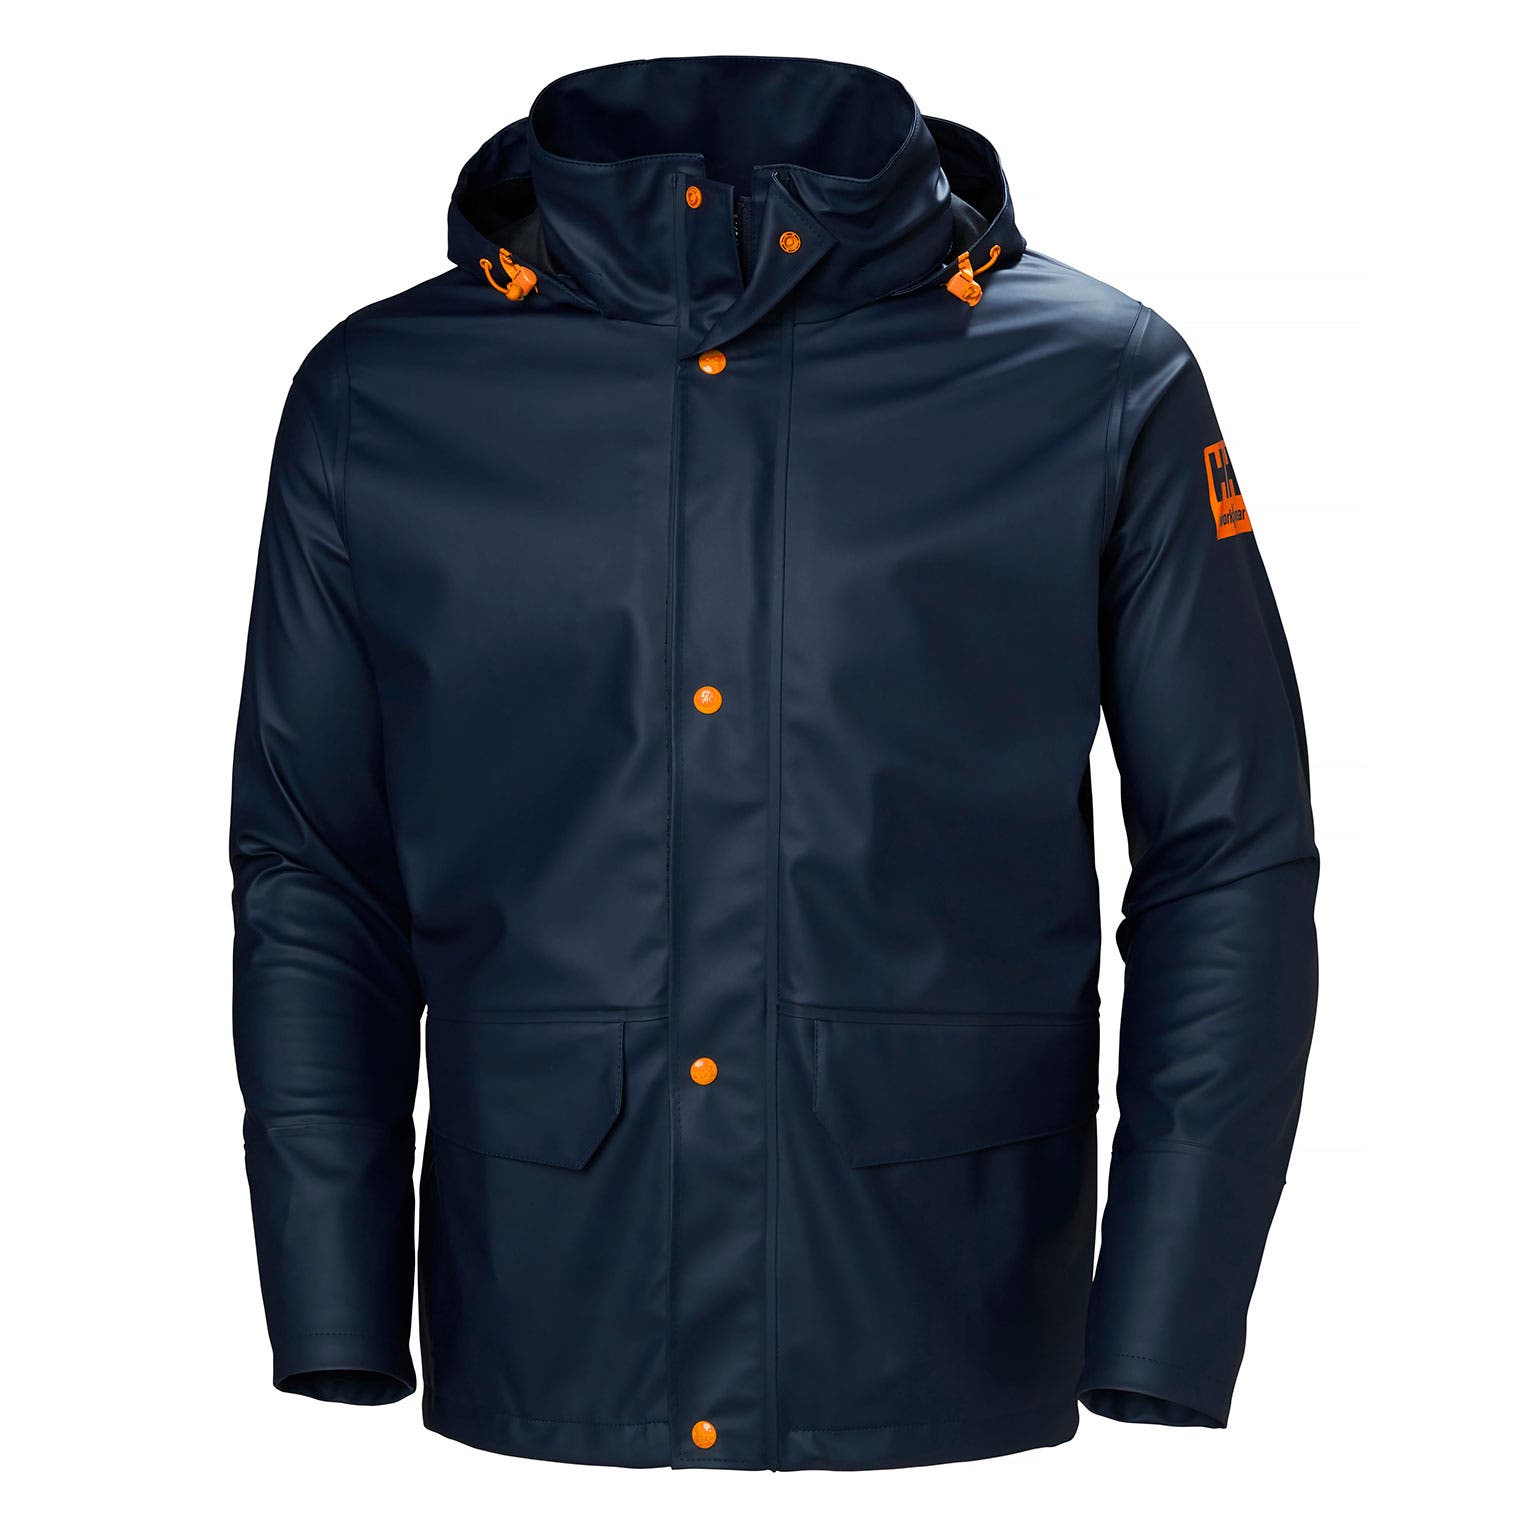 Helly Hansen Men's Gale Rain Jacket in Navy from the front